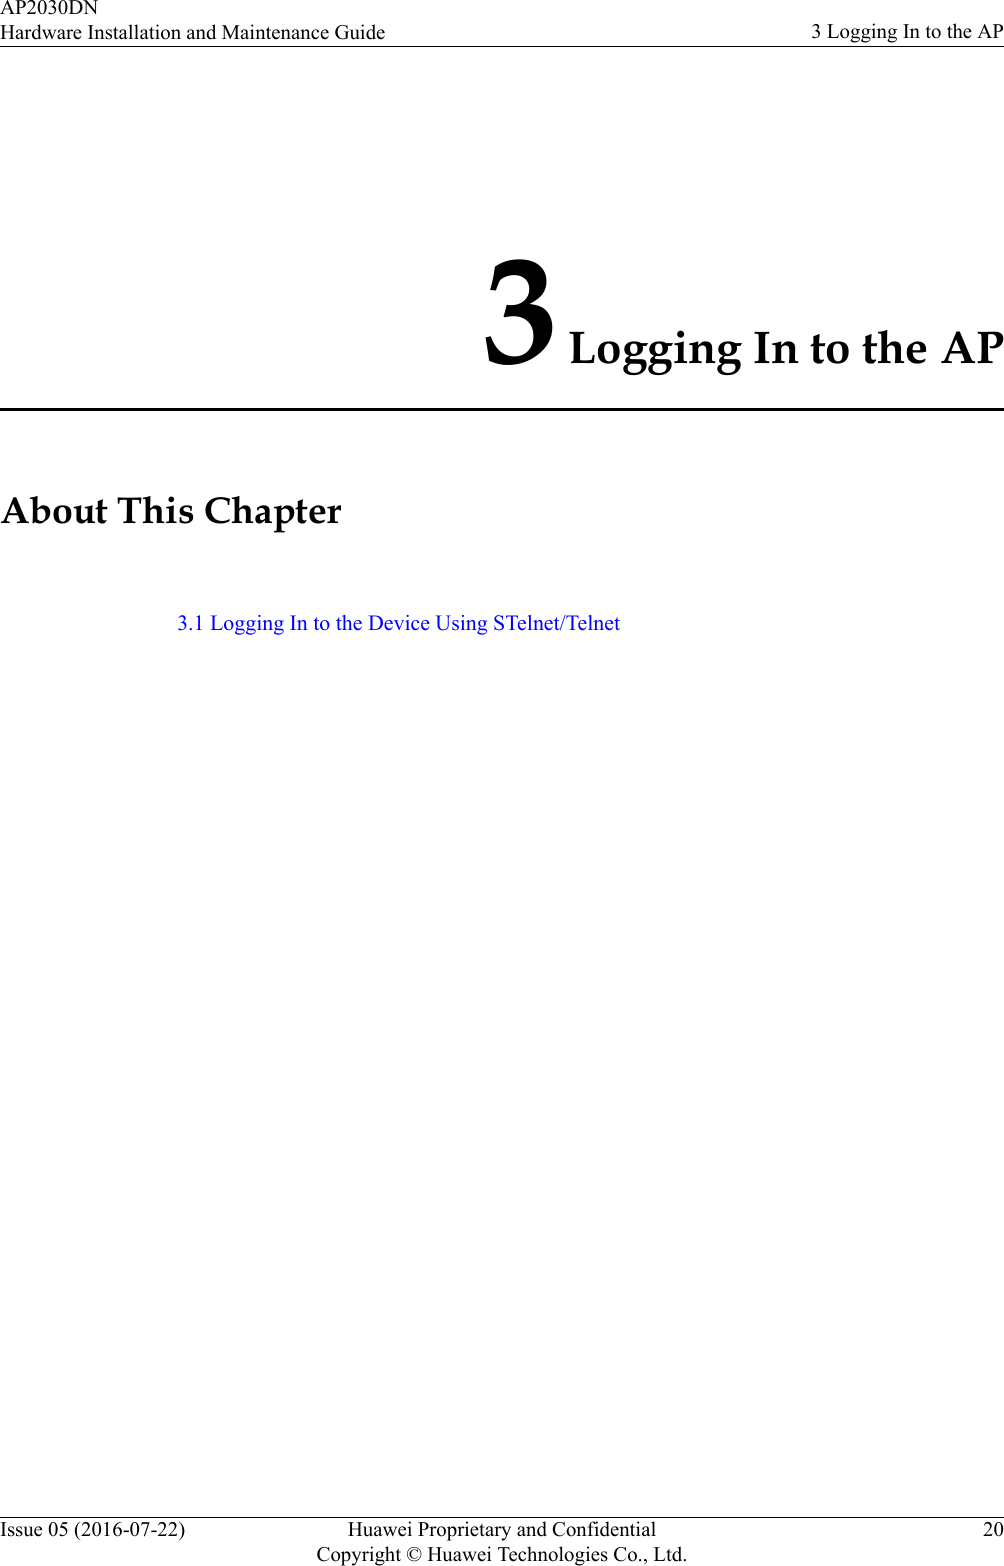 3 Logging In to the APAbout This Chapter3.1 Logging In to the Device Using STelnet/TelnetAP2030DNHardware Installation and Maintenance Guide 3 Logging In to the APIssue 05 (2016-07-22) Huawei Proprietary and ConfidentialCopyright © Huawei Technologies Co., Ltd.20